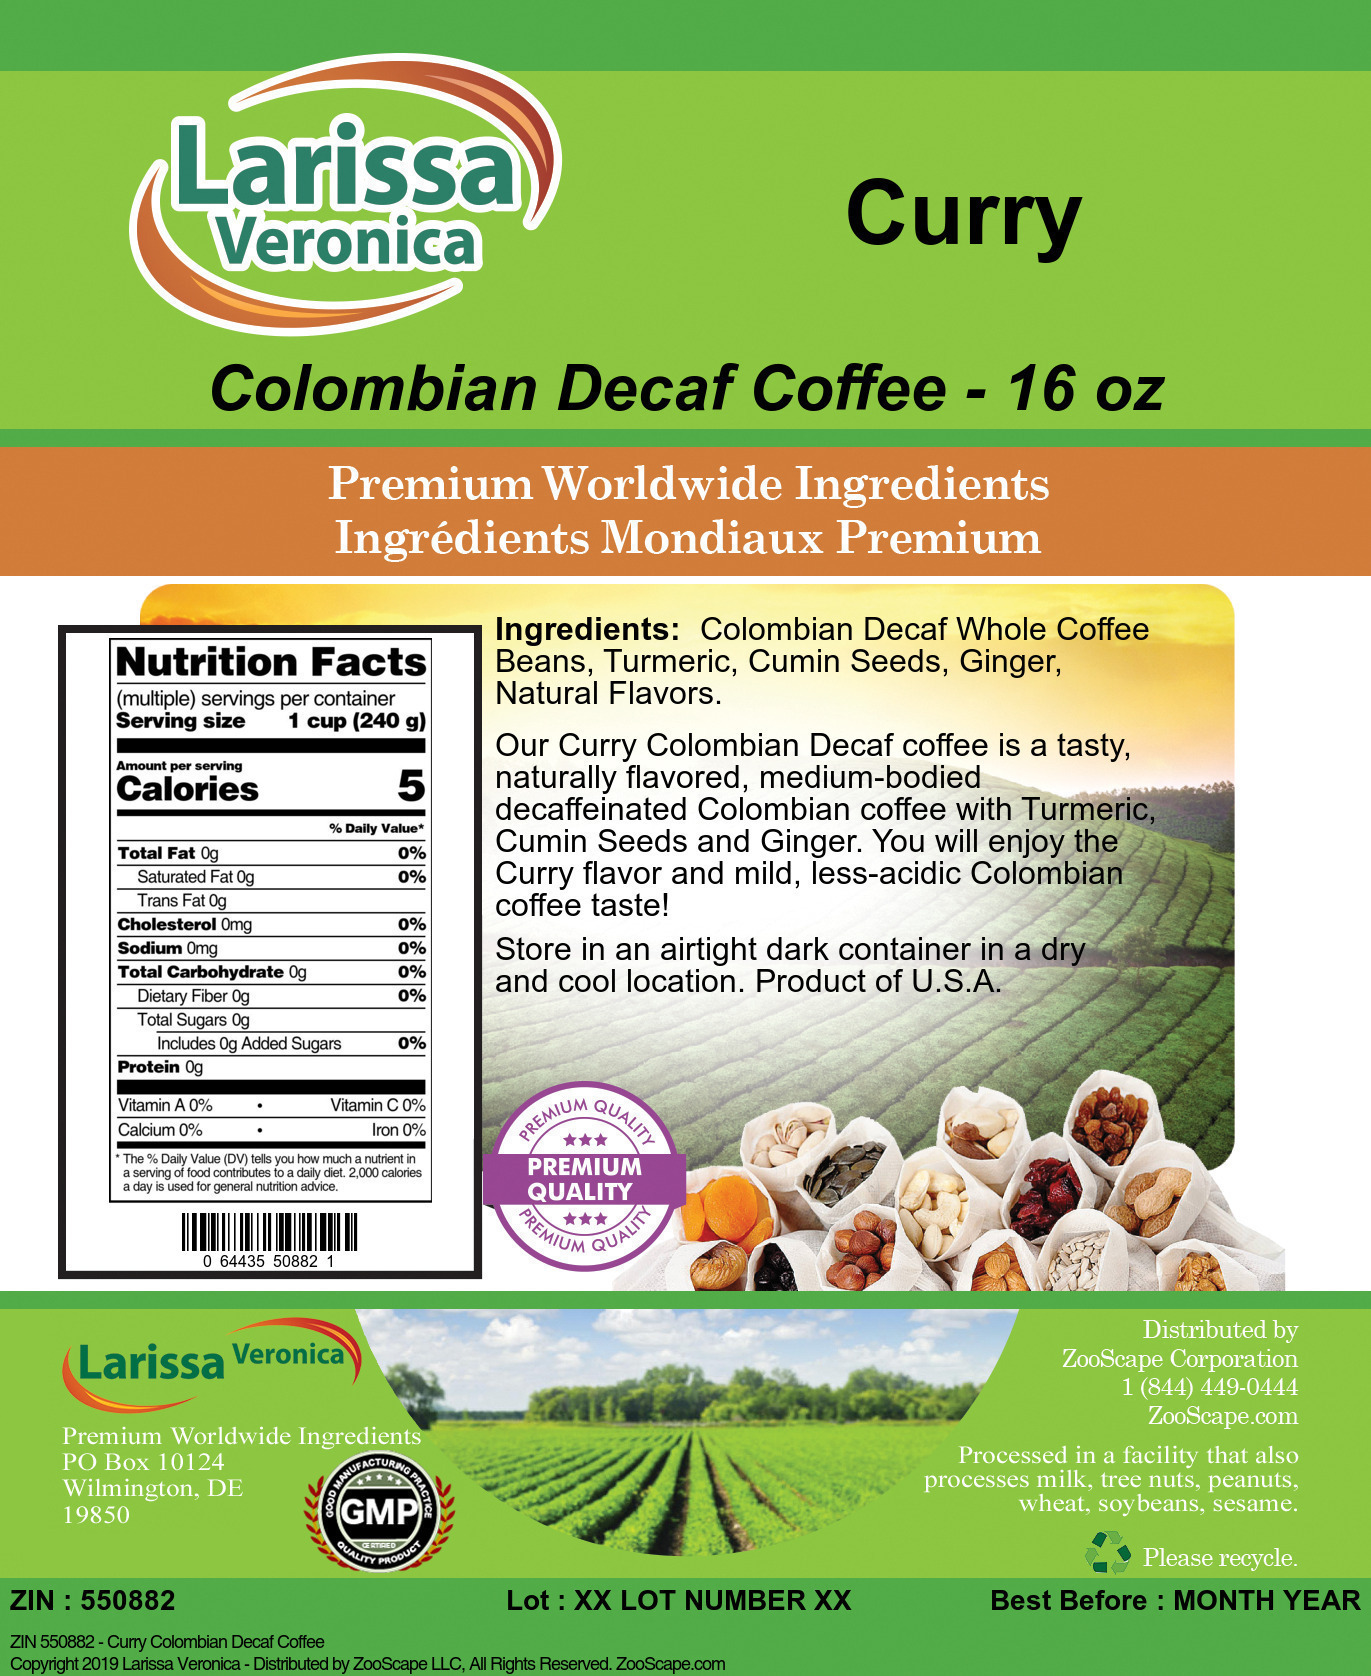 Curry Colombian Decaf Coffee - Label